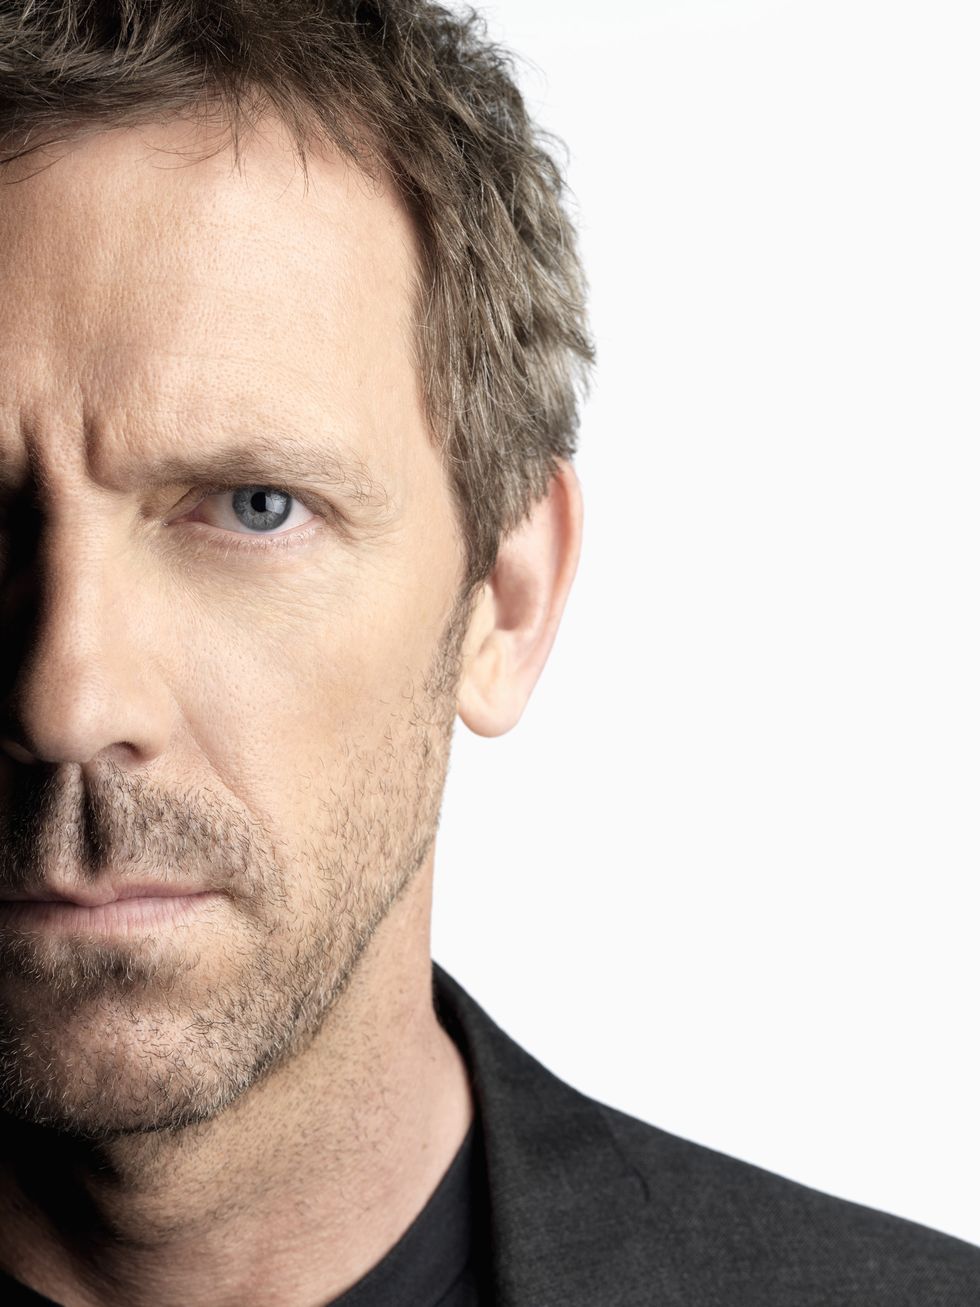 Doctor Gregory House - TV Series - Hugh Laurie - Character profile 